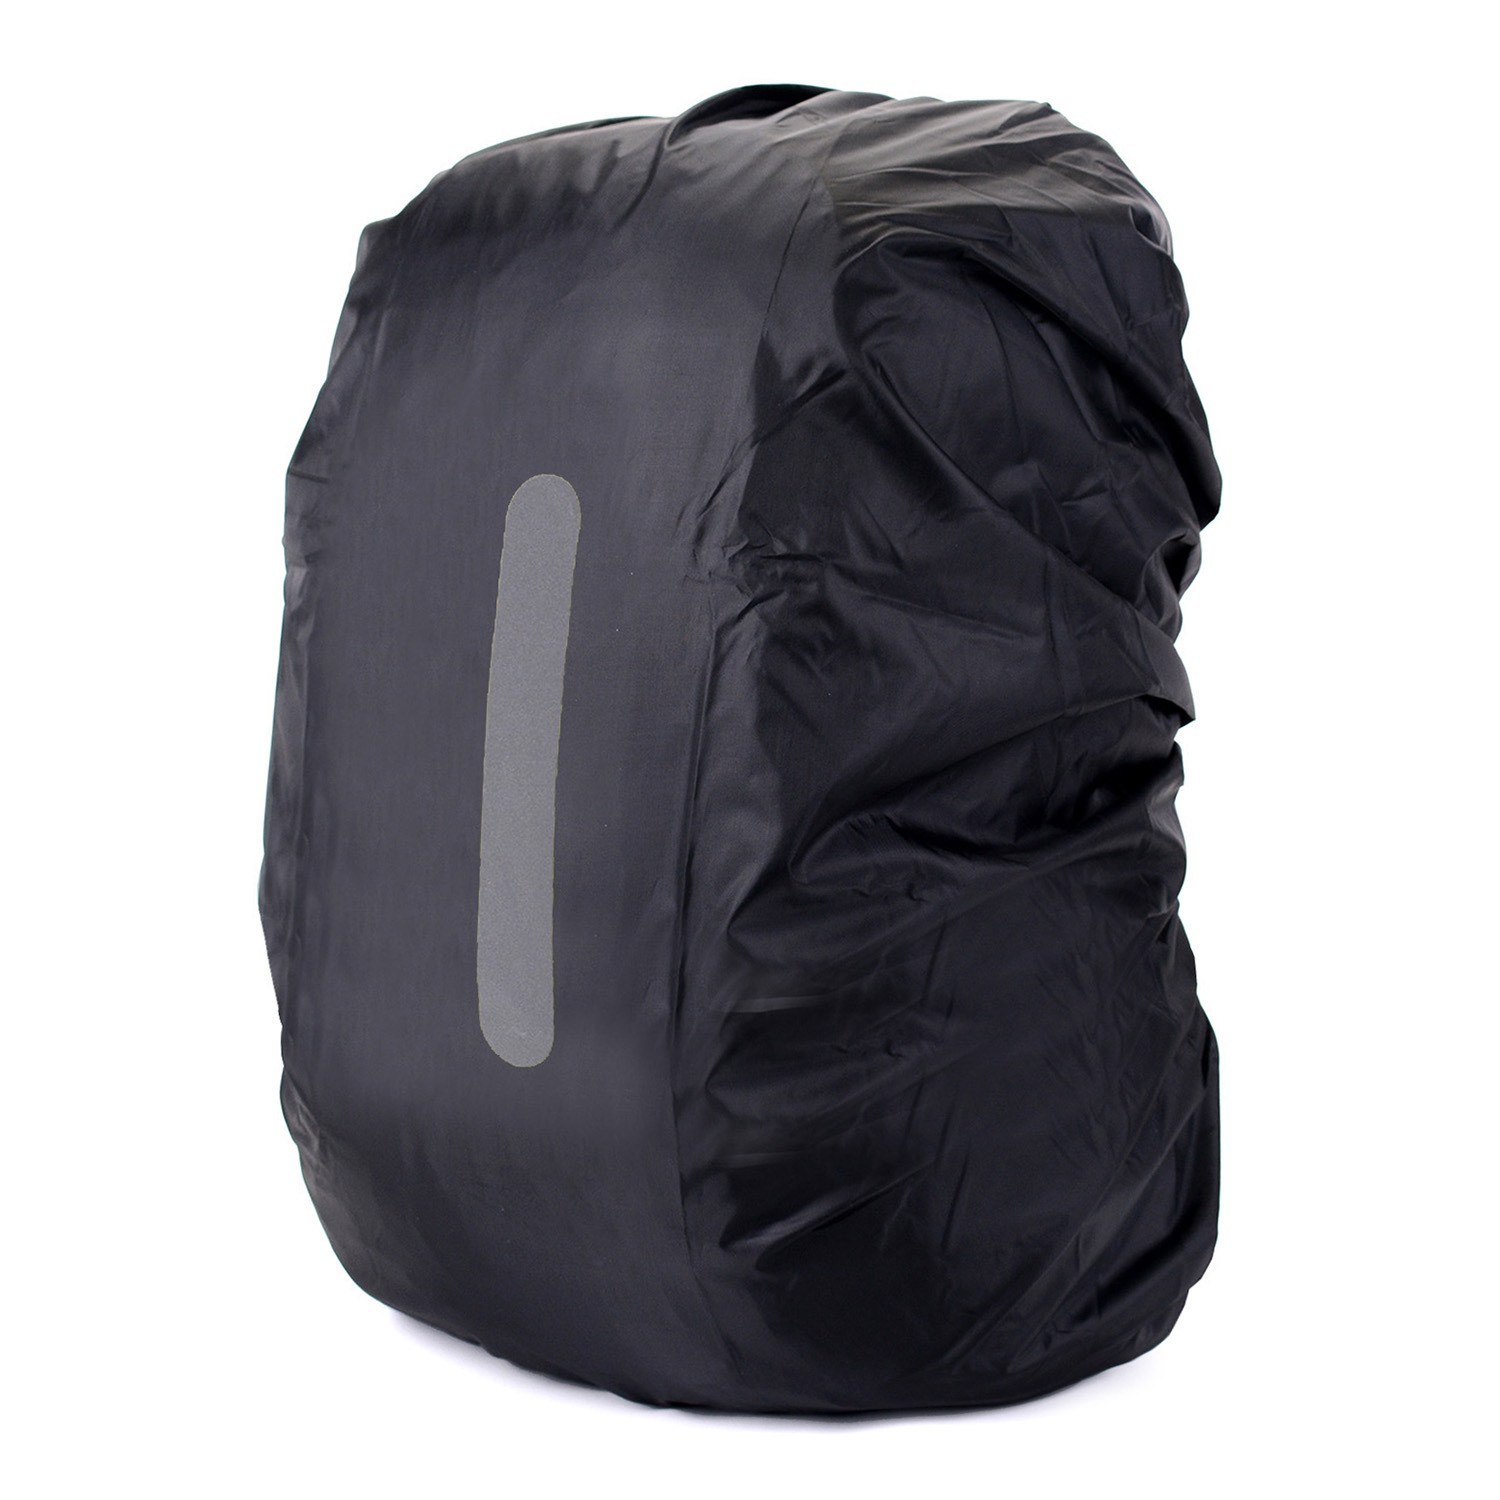 Cross-Border Supply Hot Backpack Rain Cover Outdoor Night Travel Reflective Rain Cover Reflective Sign Schoolbag Waterproof Cover